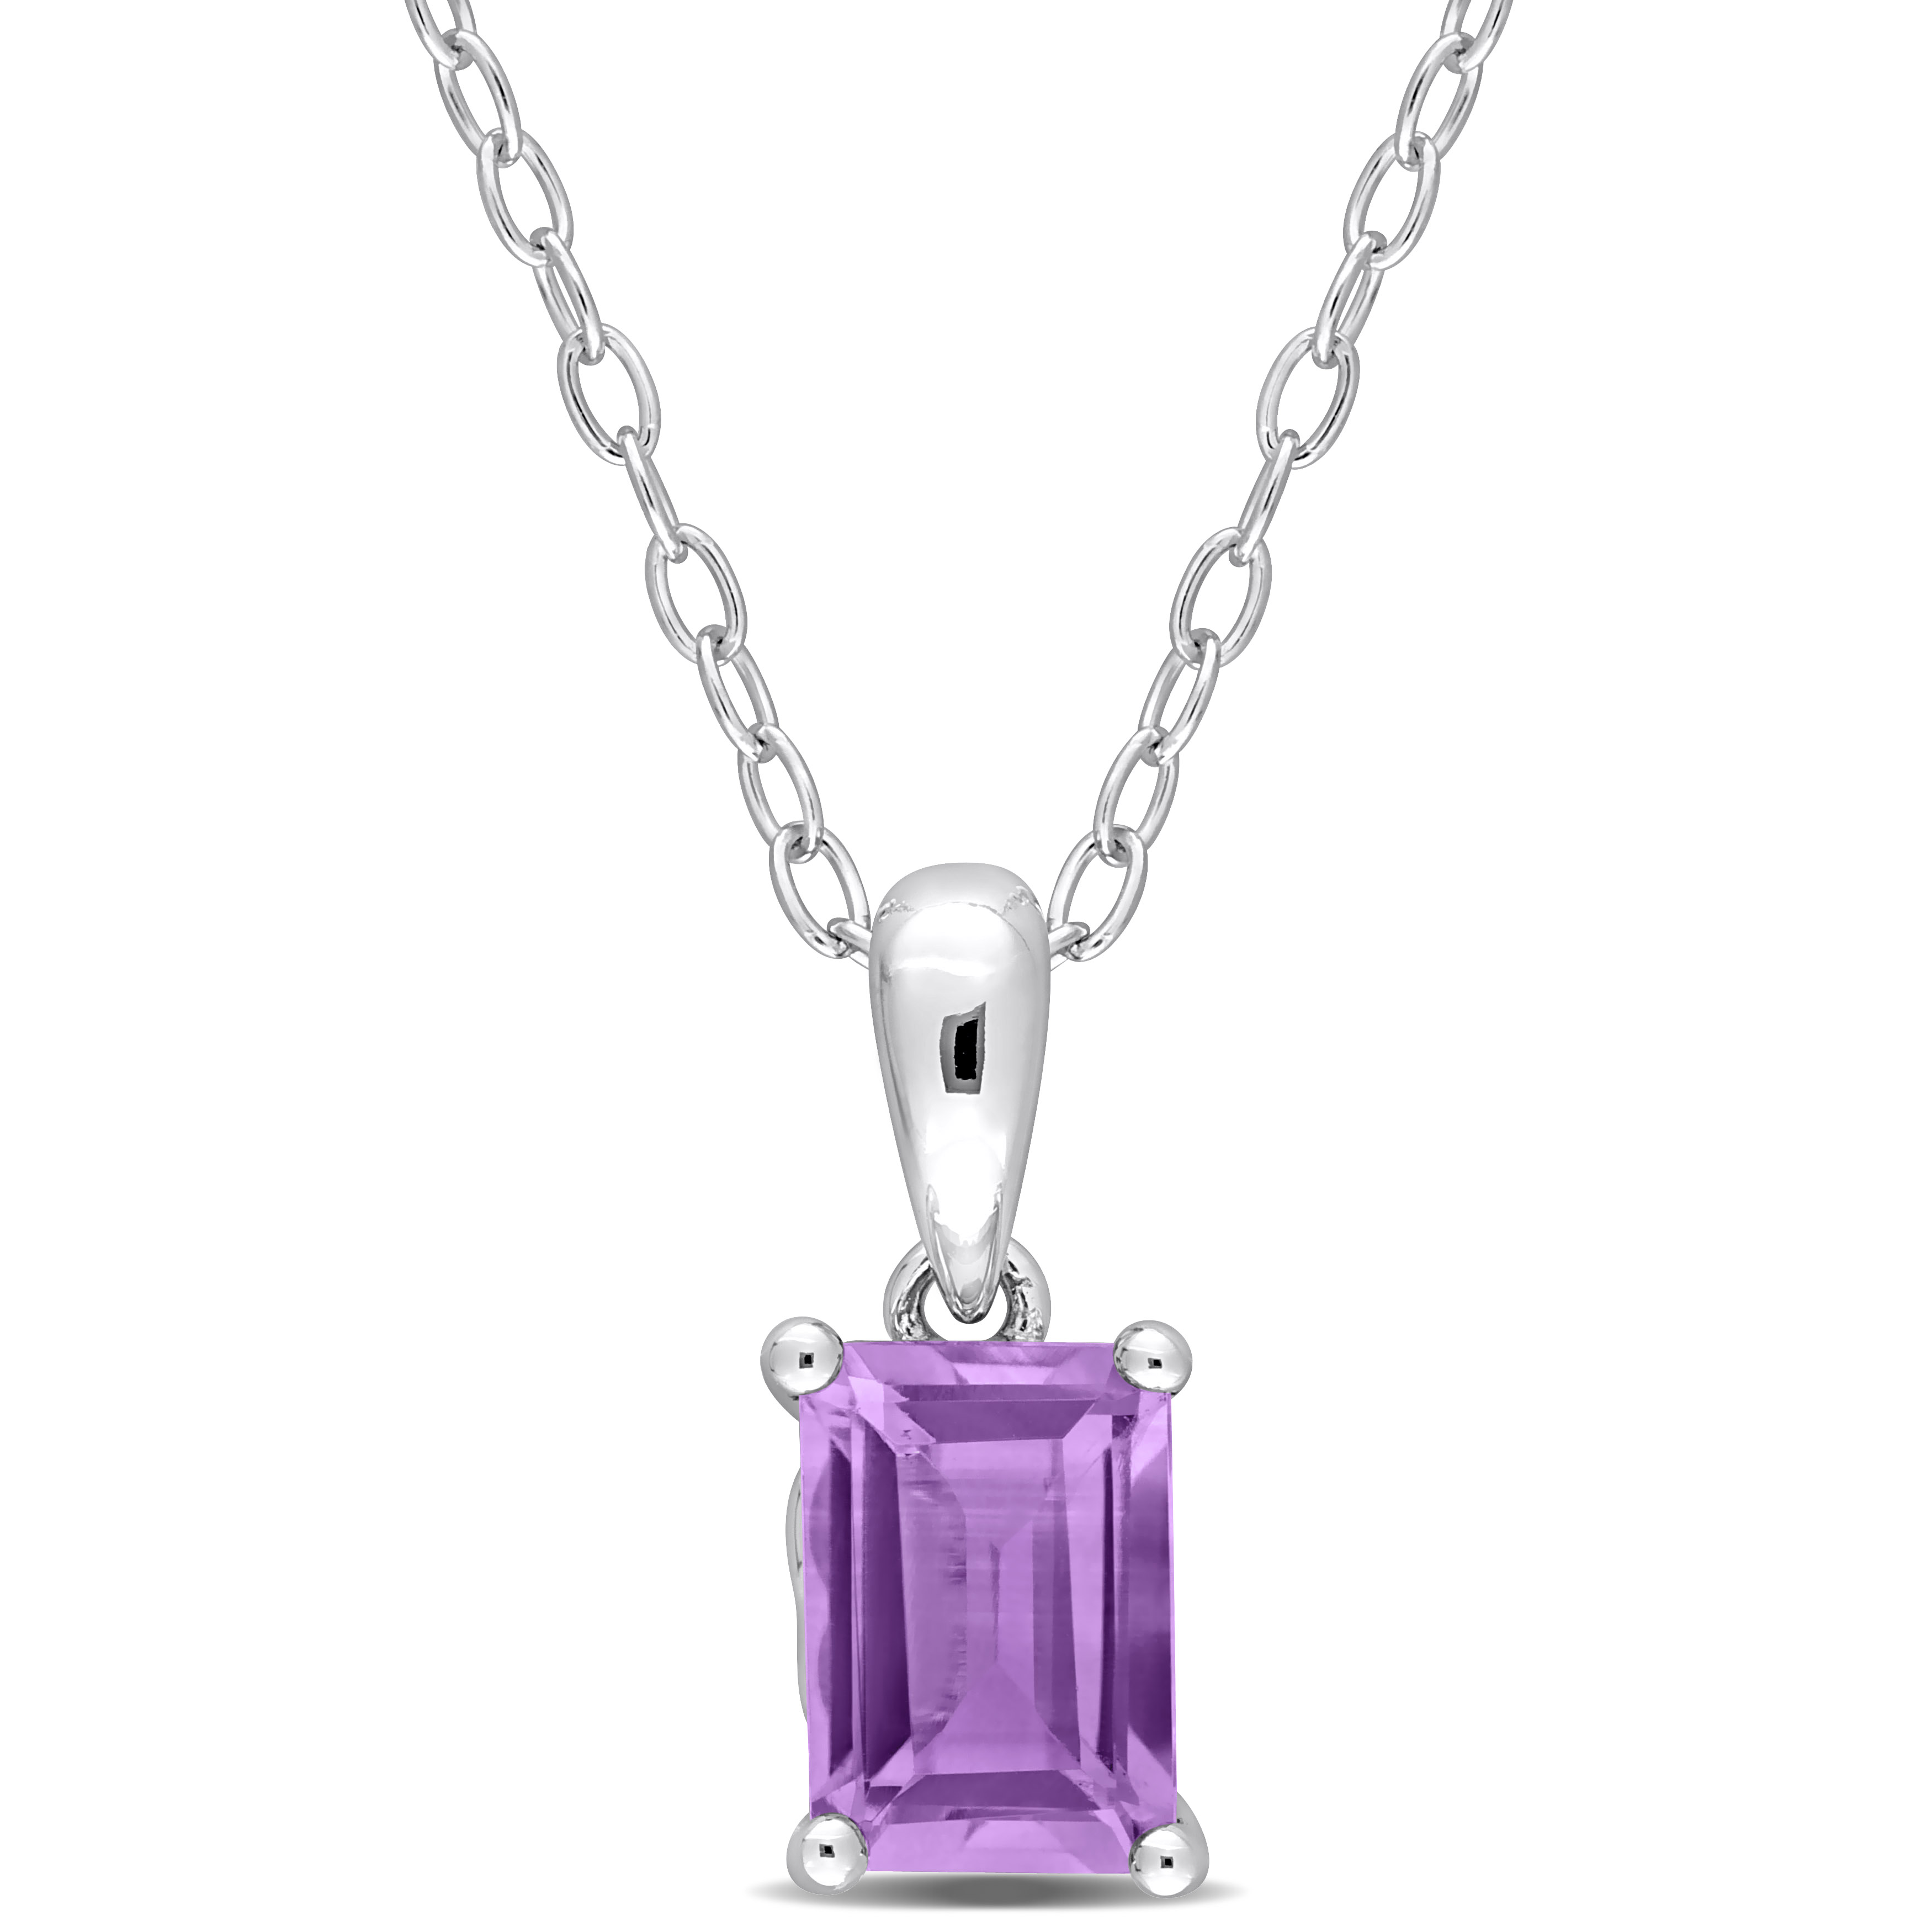 7/8 CT TGW Emerald Cut Amethyst Solitaire Heart Design Pendant with Chain in Sterling Silver - 18 in.